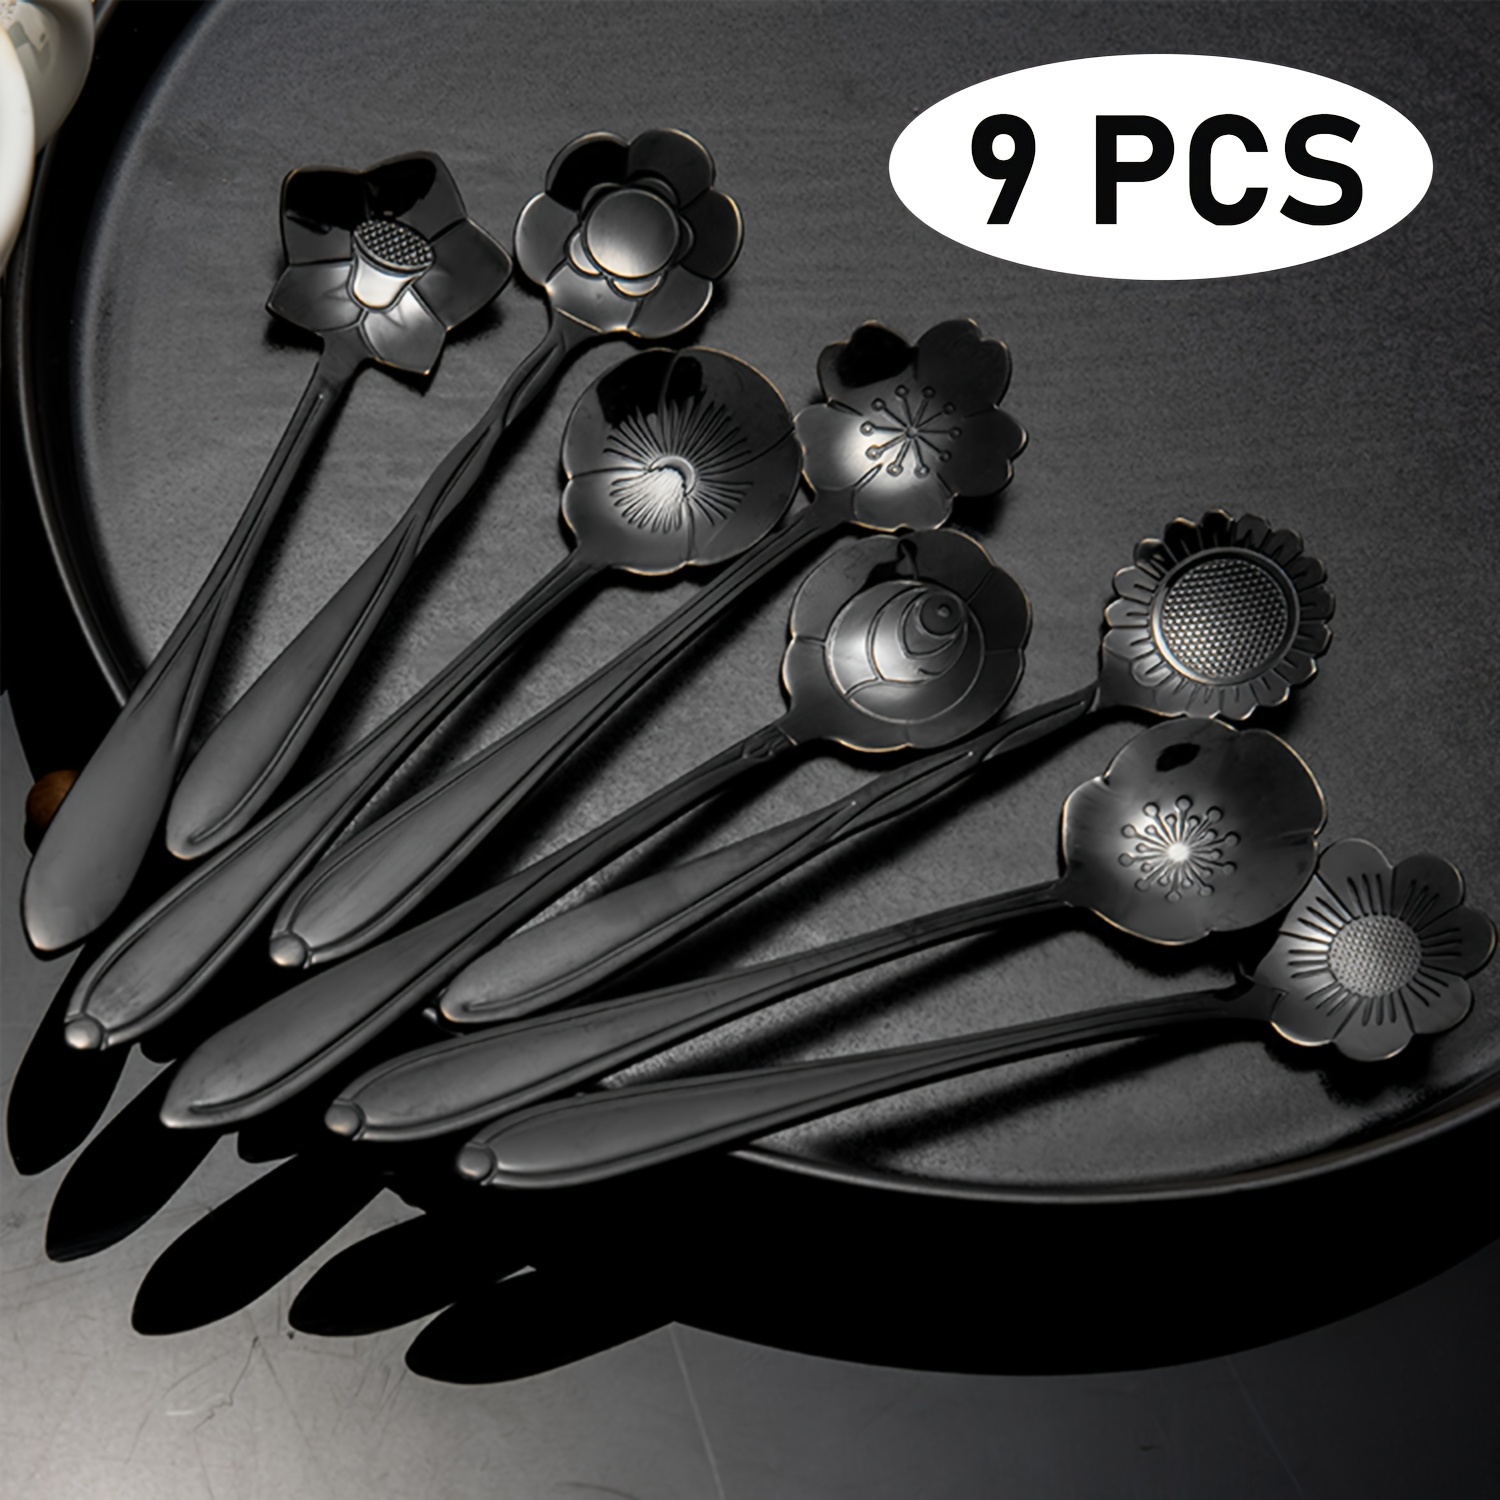 9pcs Stainless Steel Cherry Spoons Set 4pcs Long Coffee Spoons And 5pcs  Short Dessert Spoons Set Creative Gift For Viewing Cherry, Shop The Latest  Trends